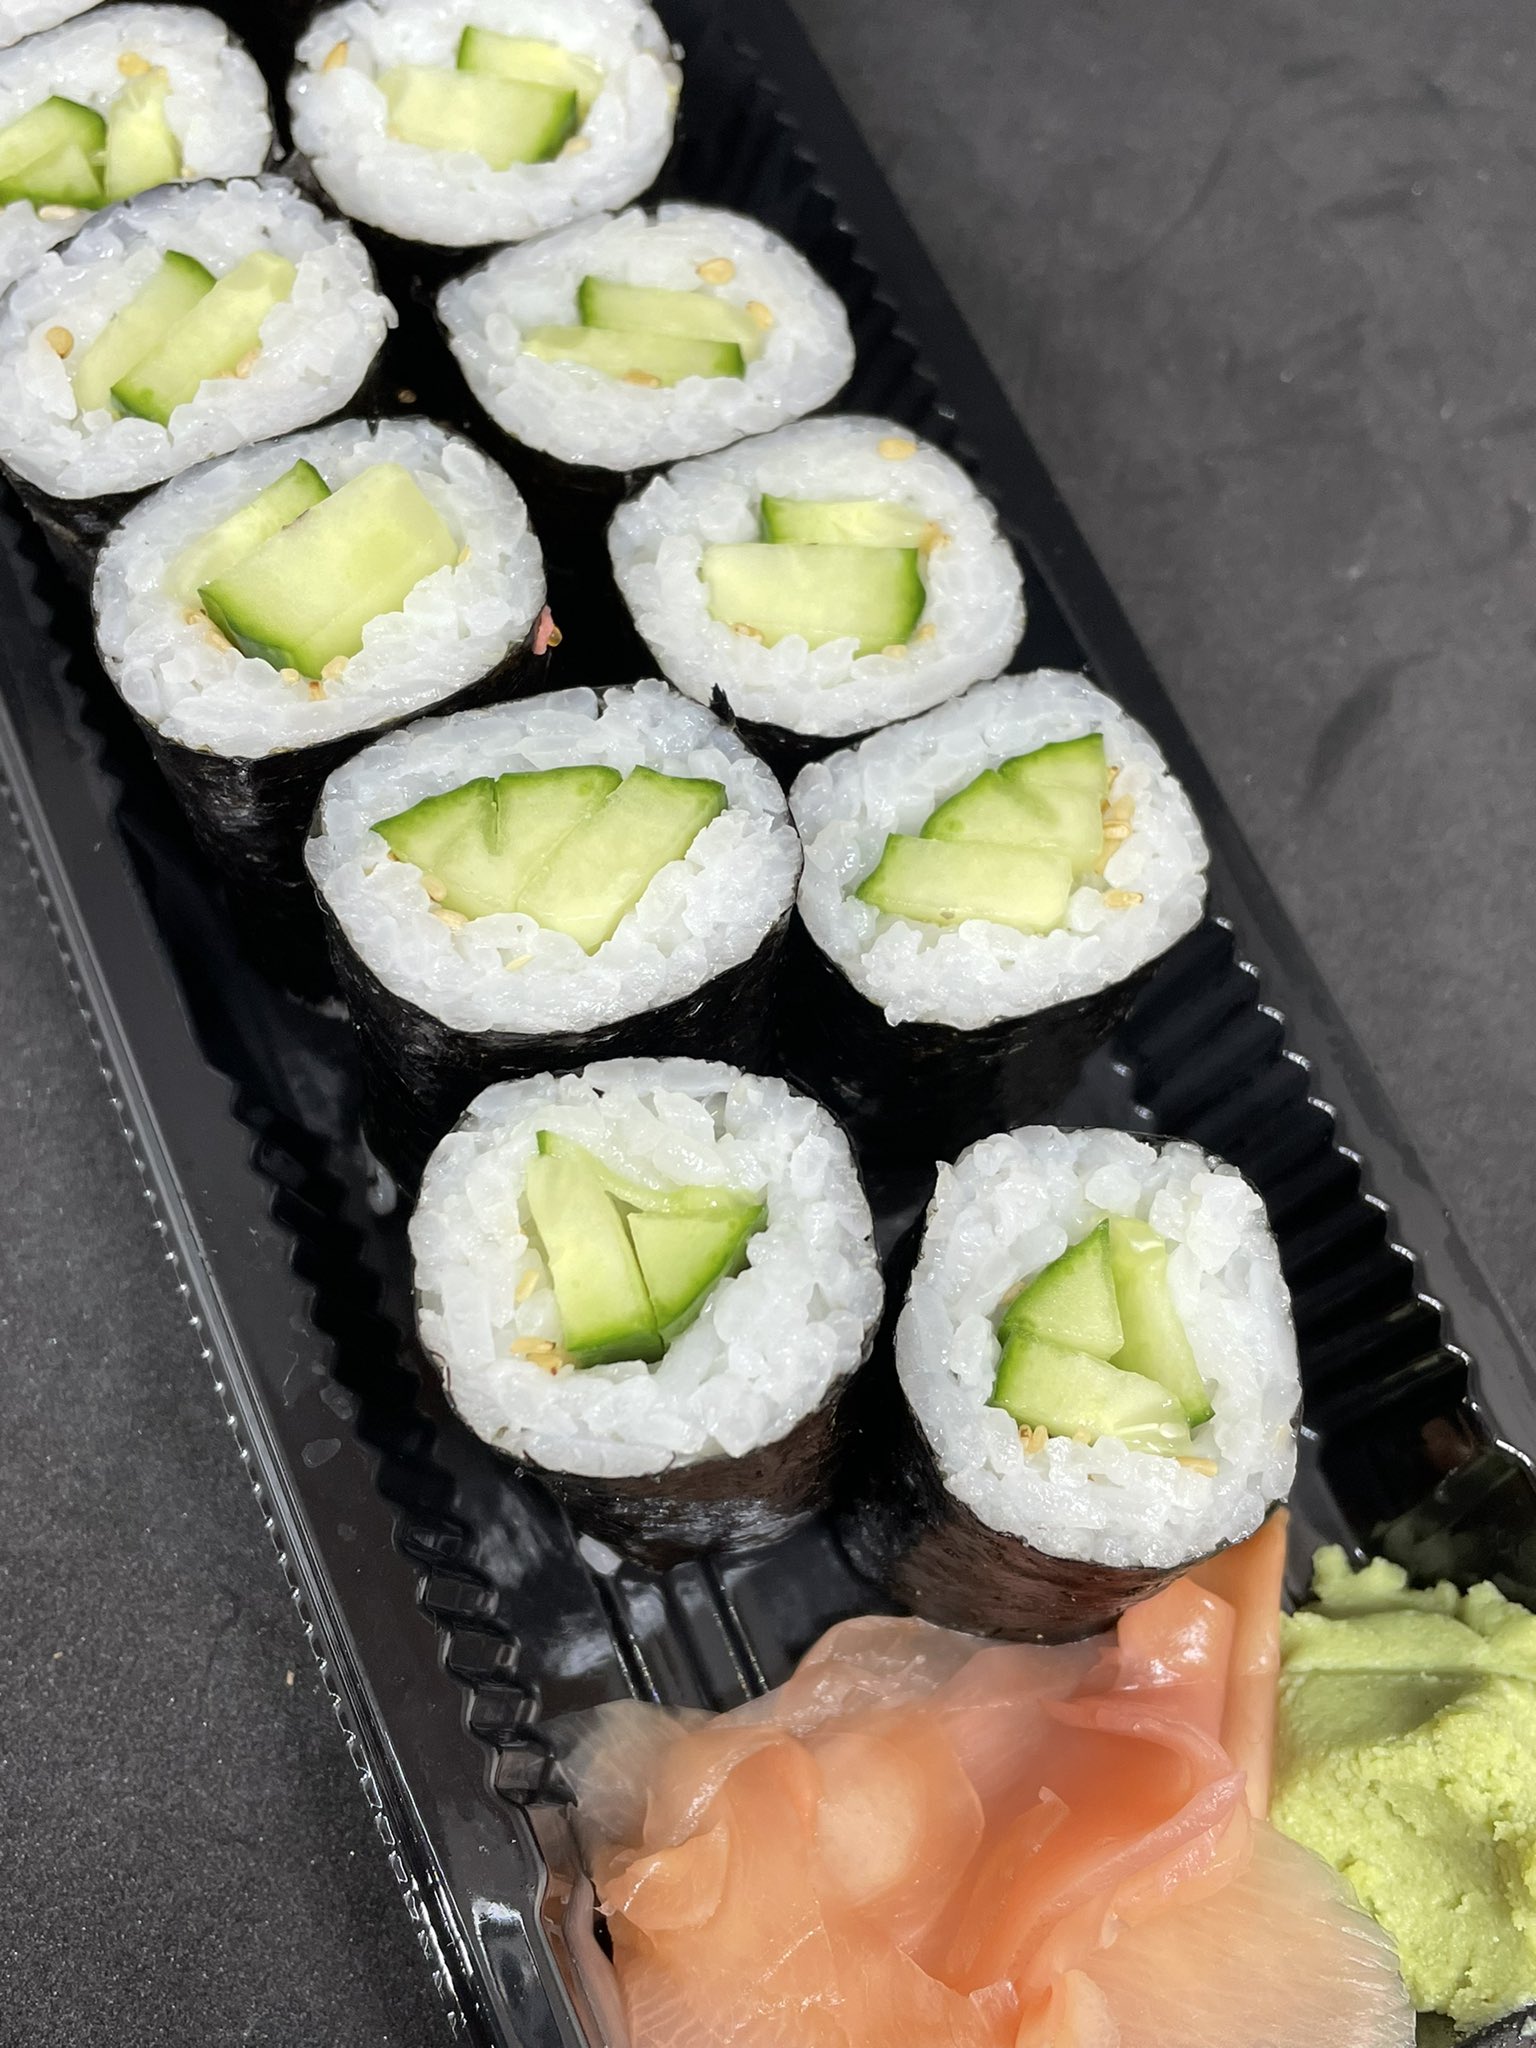 Slepen elegant Motivatie Chef Jay on Twitter: "It's Meatless Monday! At least it's Not Carb-less  Monday… Kappa Maki (Cucumber Roll) from Yama Seafood in San Gabriel # kappamaki #sushi #yamaseafood #sangabriel #inthe626 #meatlessmonday  https://t.co/gumvGM2JoZ" / Twitter